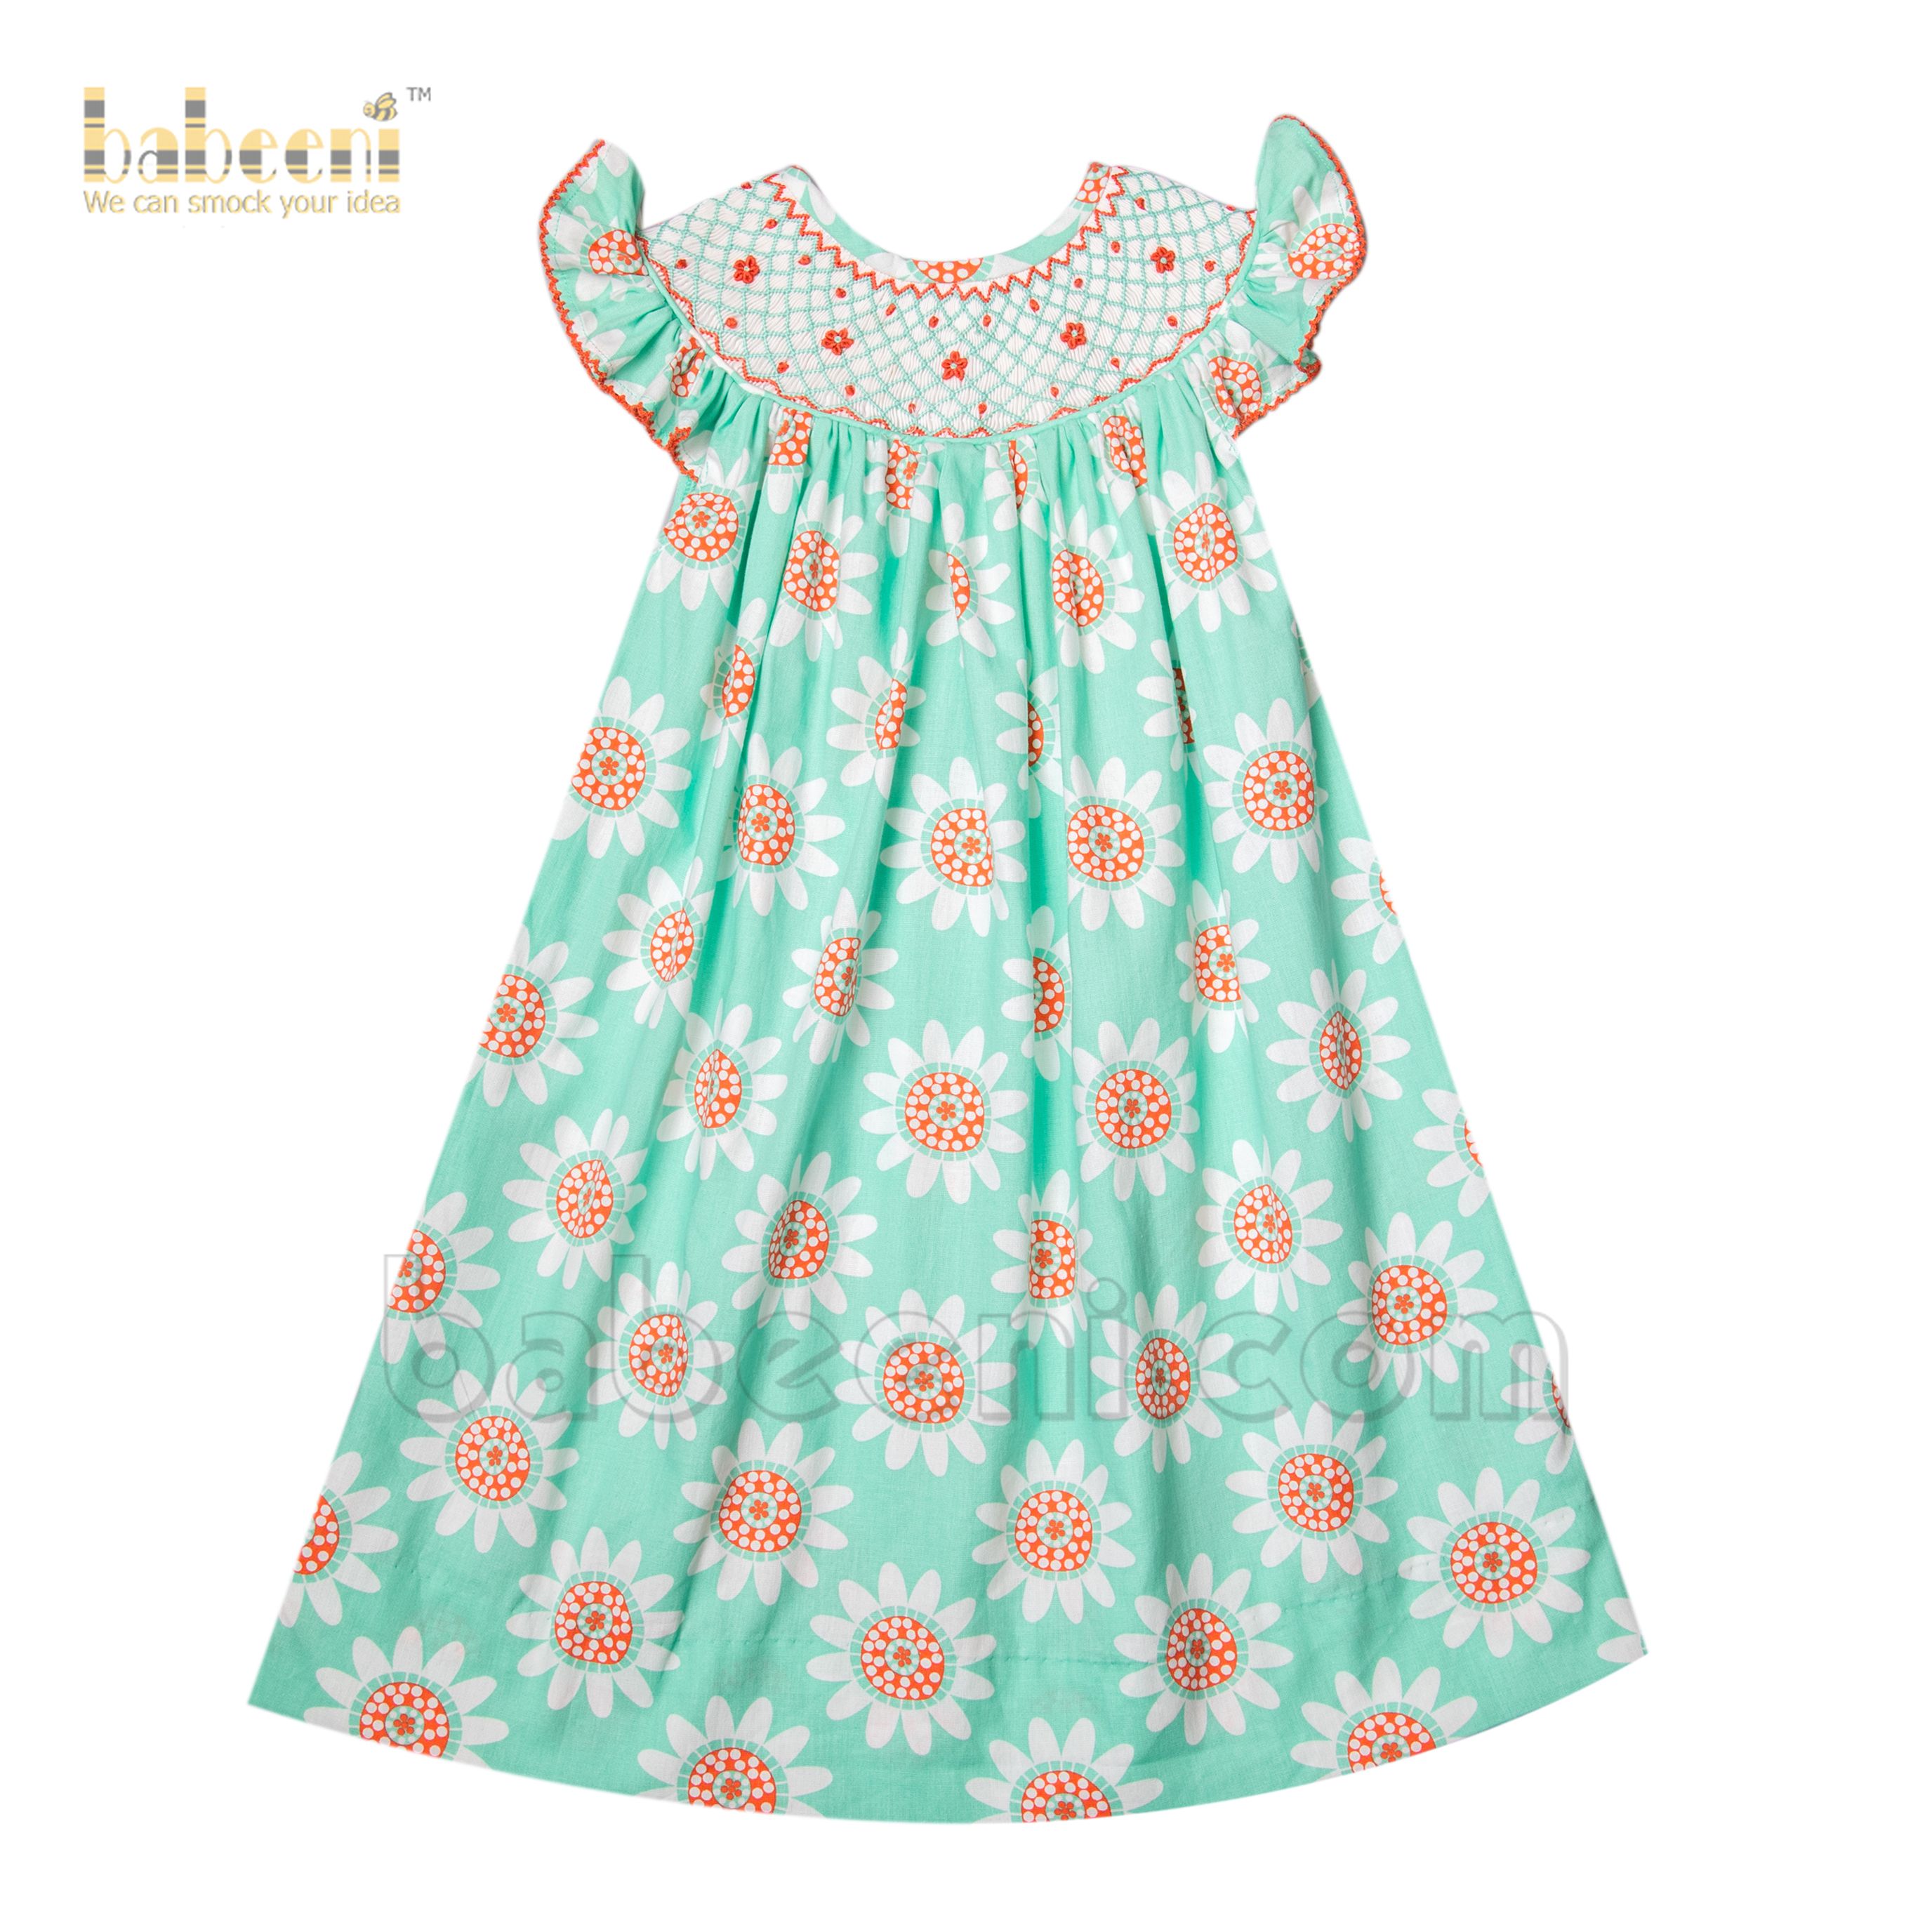 Coral geometric smocked mint dress for baby girl -DR 3077 